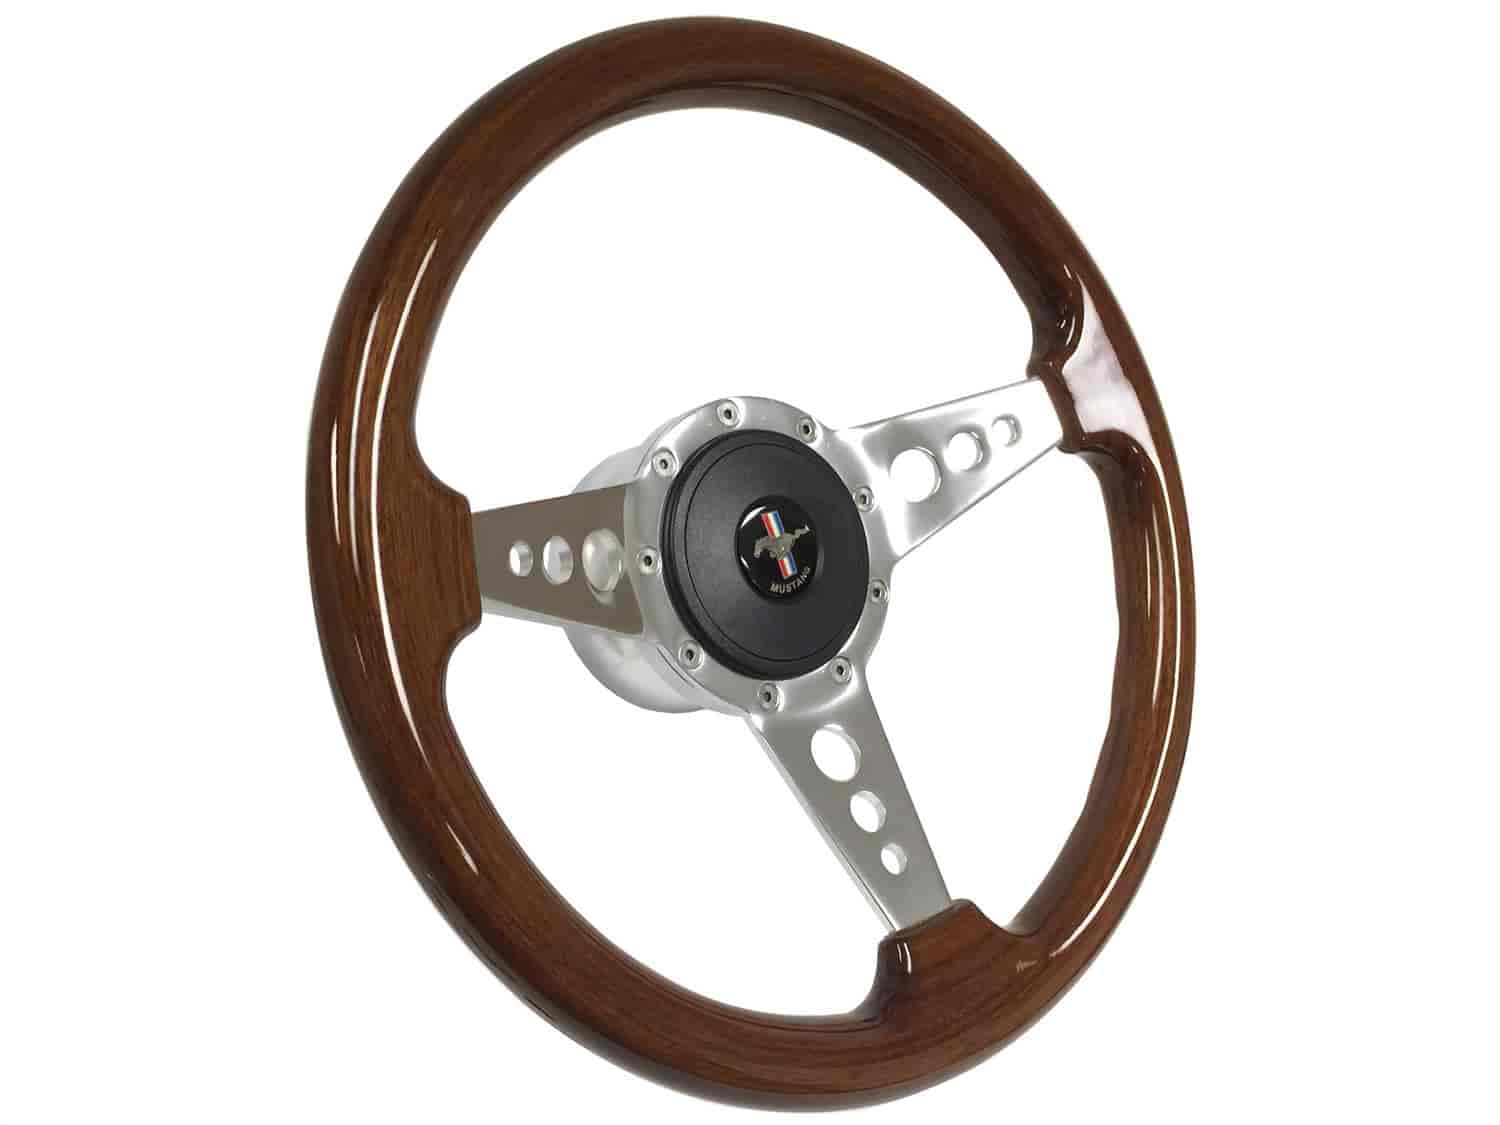 S9 Sport Steering Wheel Kit 1964-1972 Ford/Mercury, 14 in. Diameter, Walnut Wood Grip, w/ 9-Bolt Adapter and Horn Button